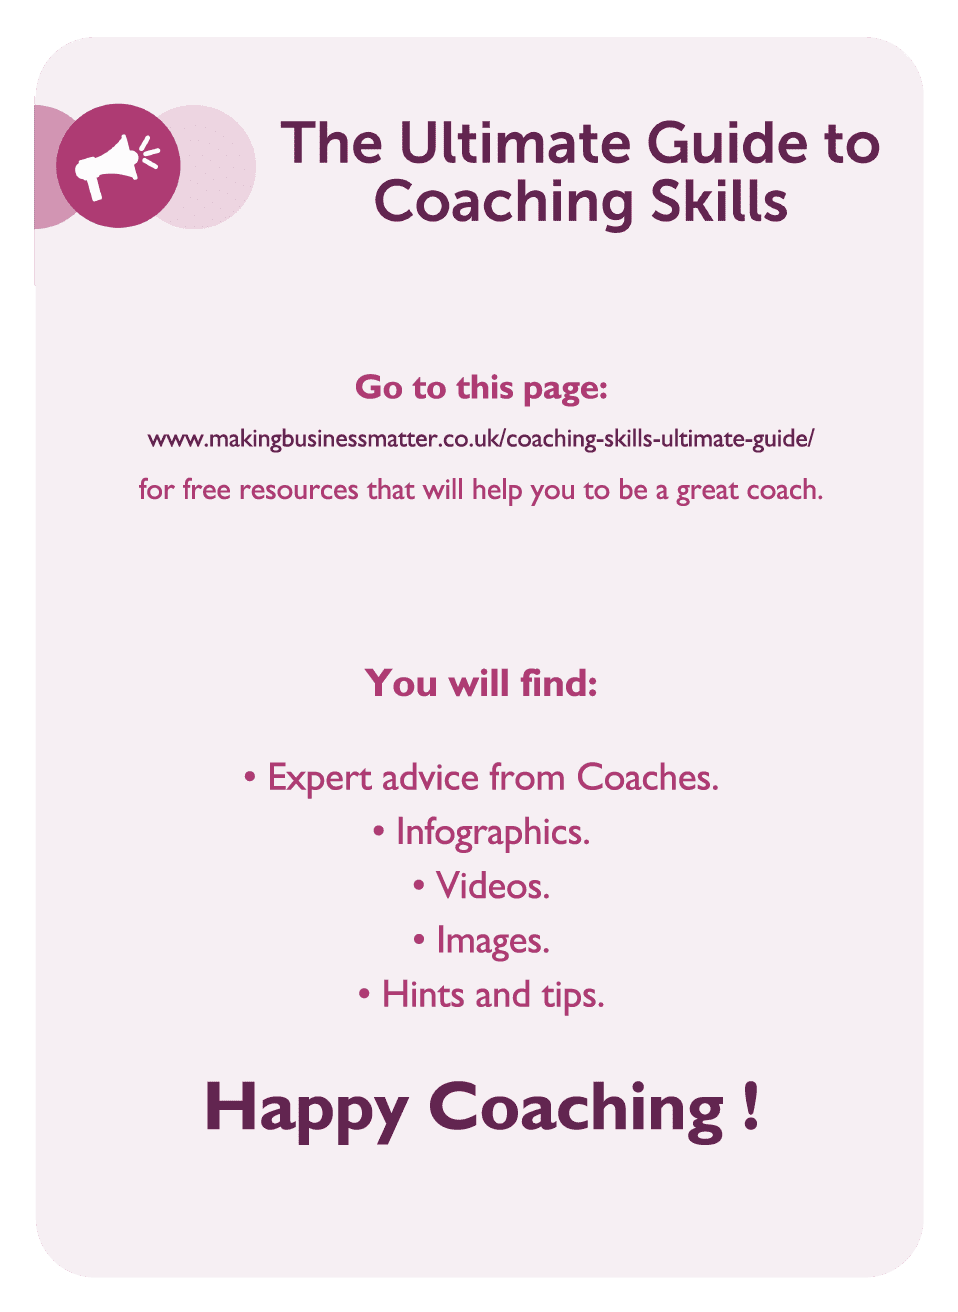 Coaching card titled The Ultimate Guide to Coaching Skills